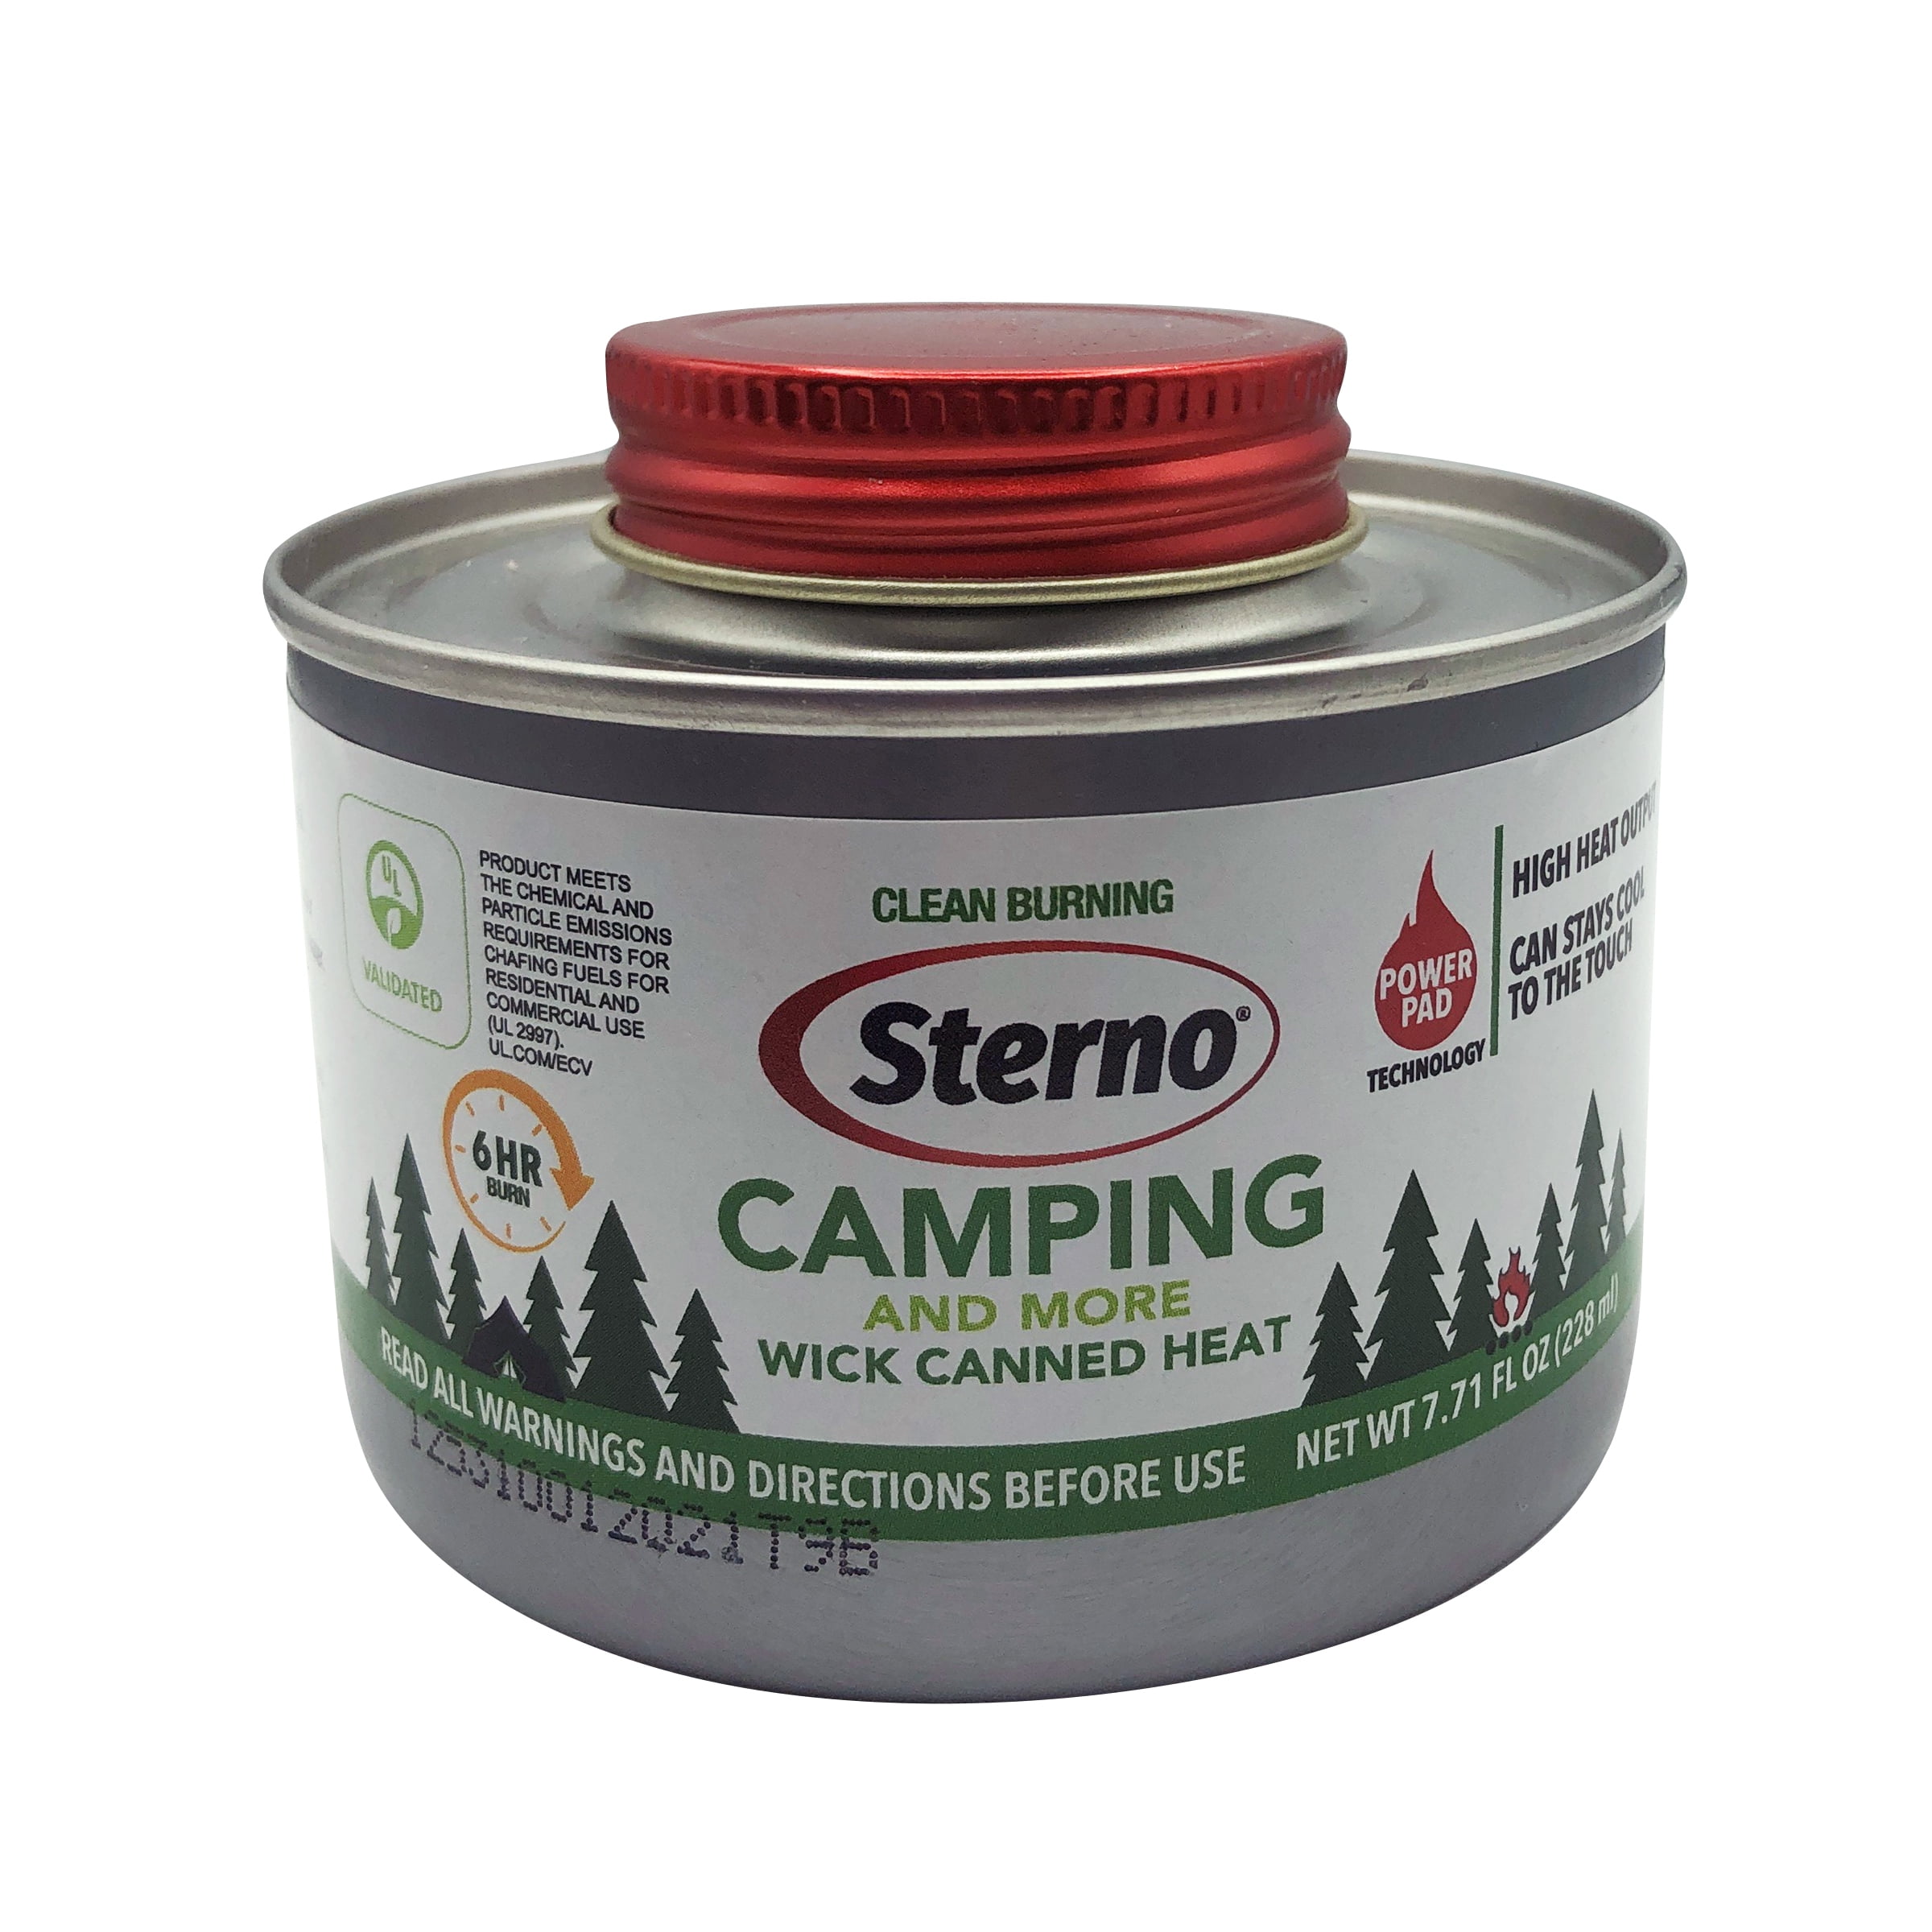 Sterno 6 Hour Camping Wick Canned Heat